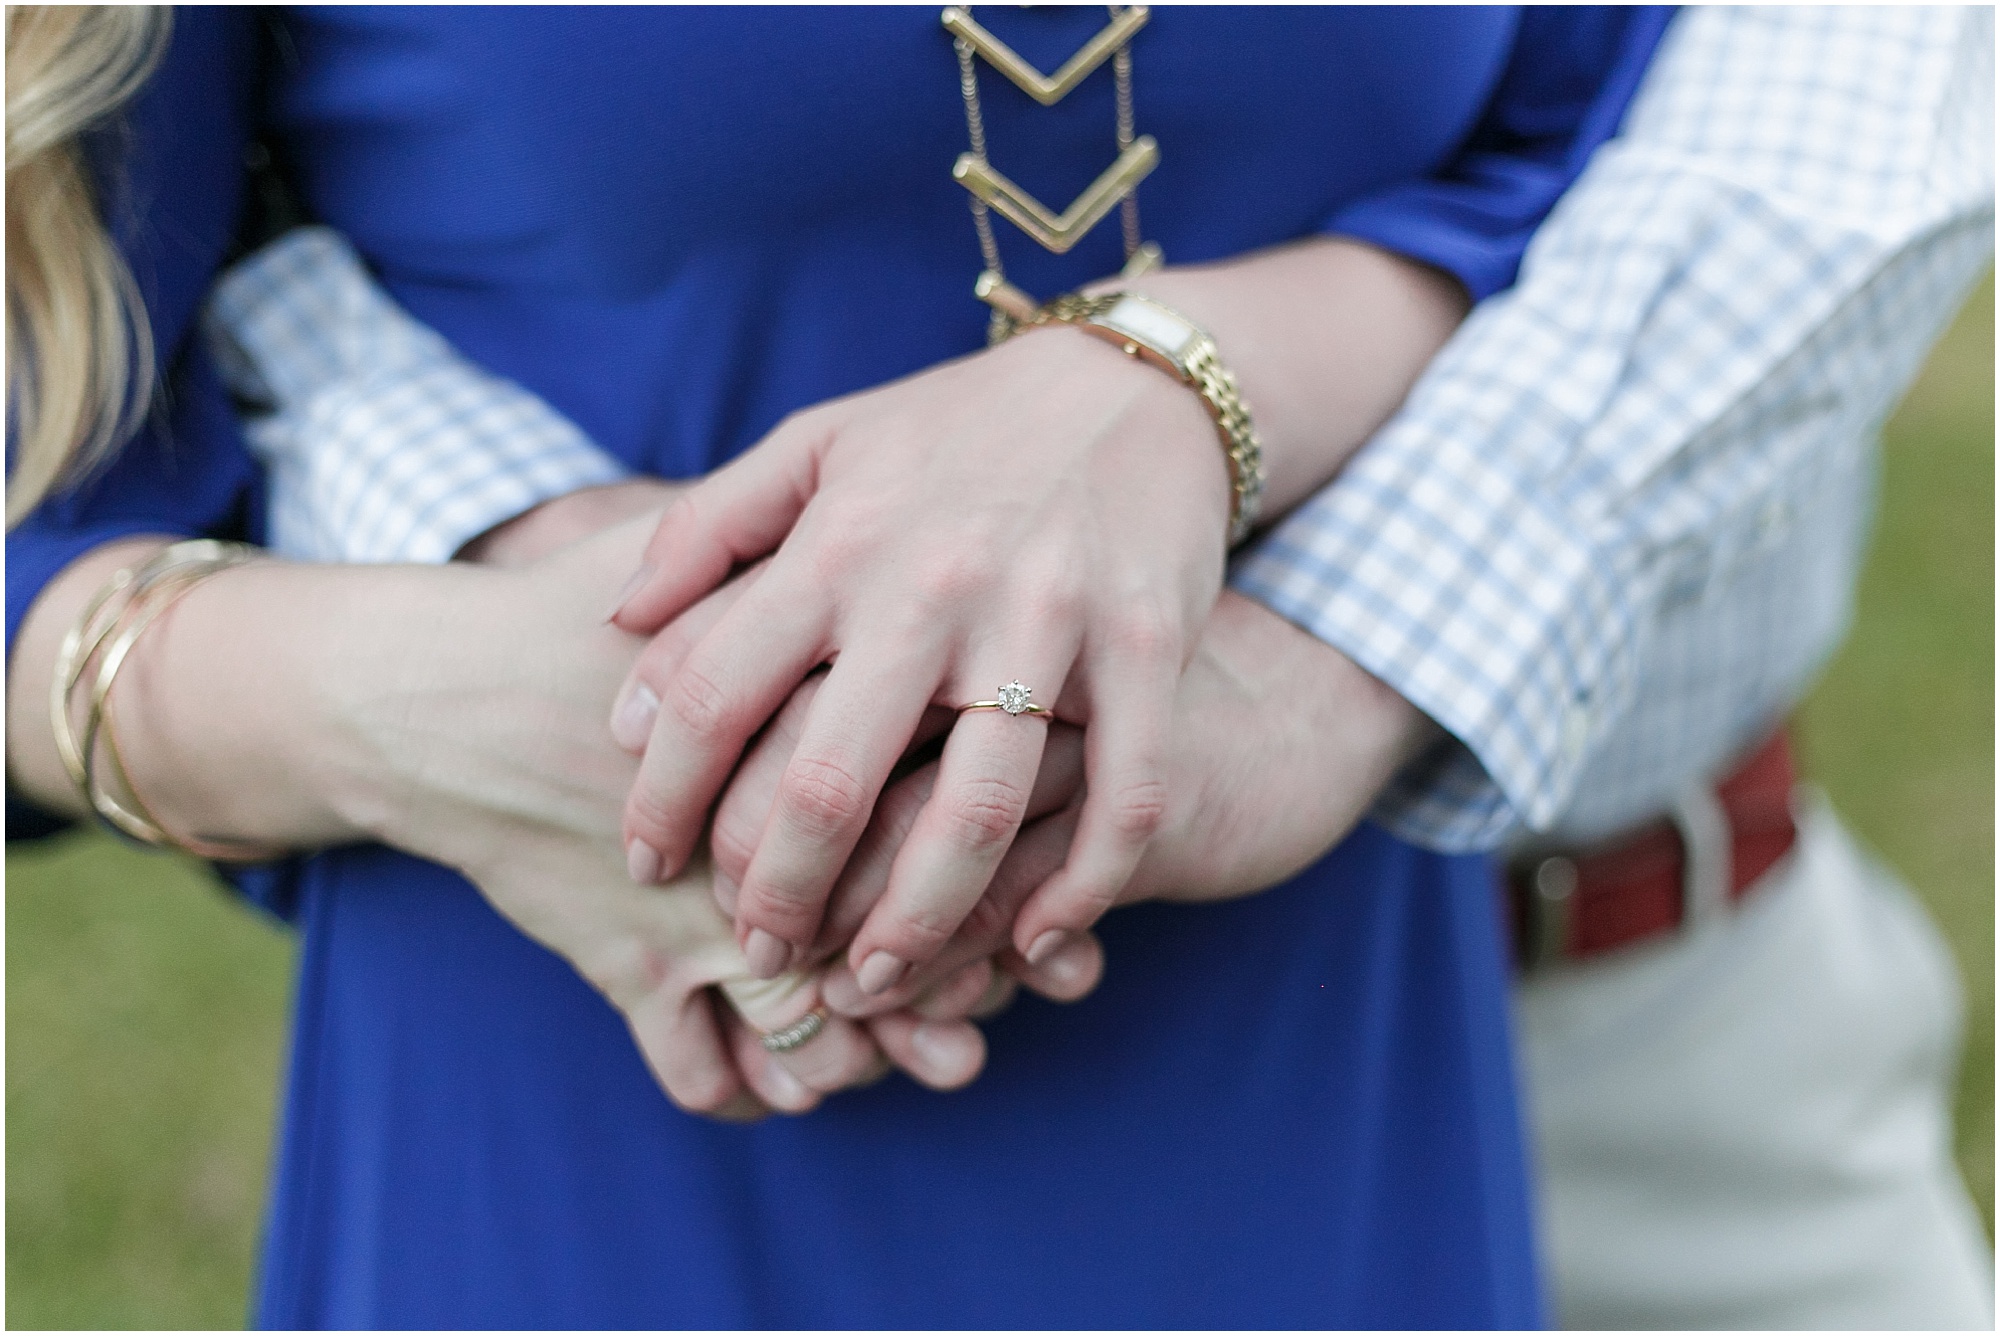 Guy holding woman hands while showing engagement ring.